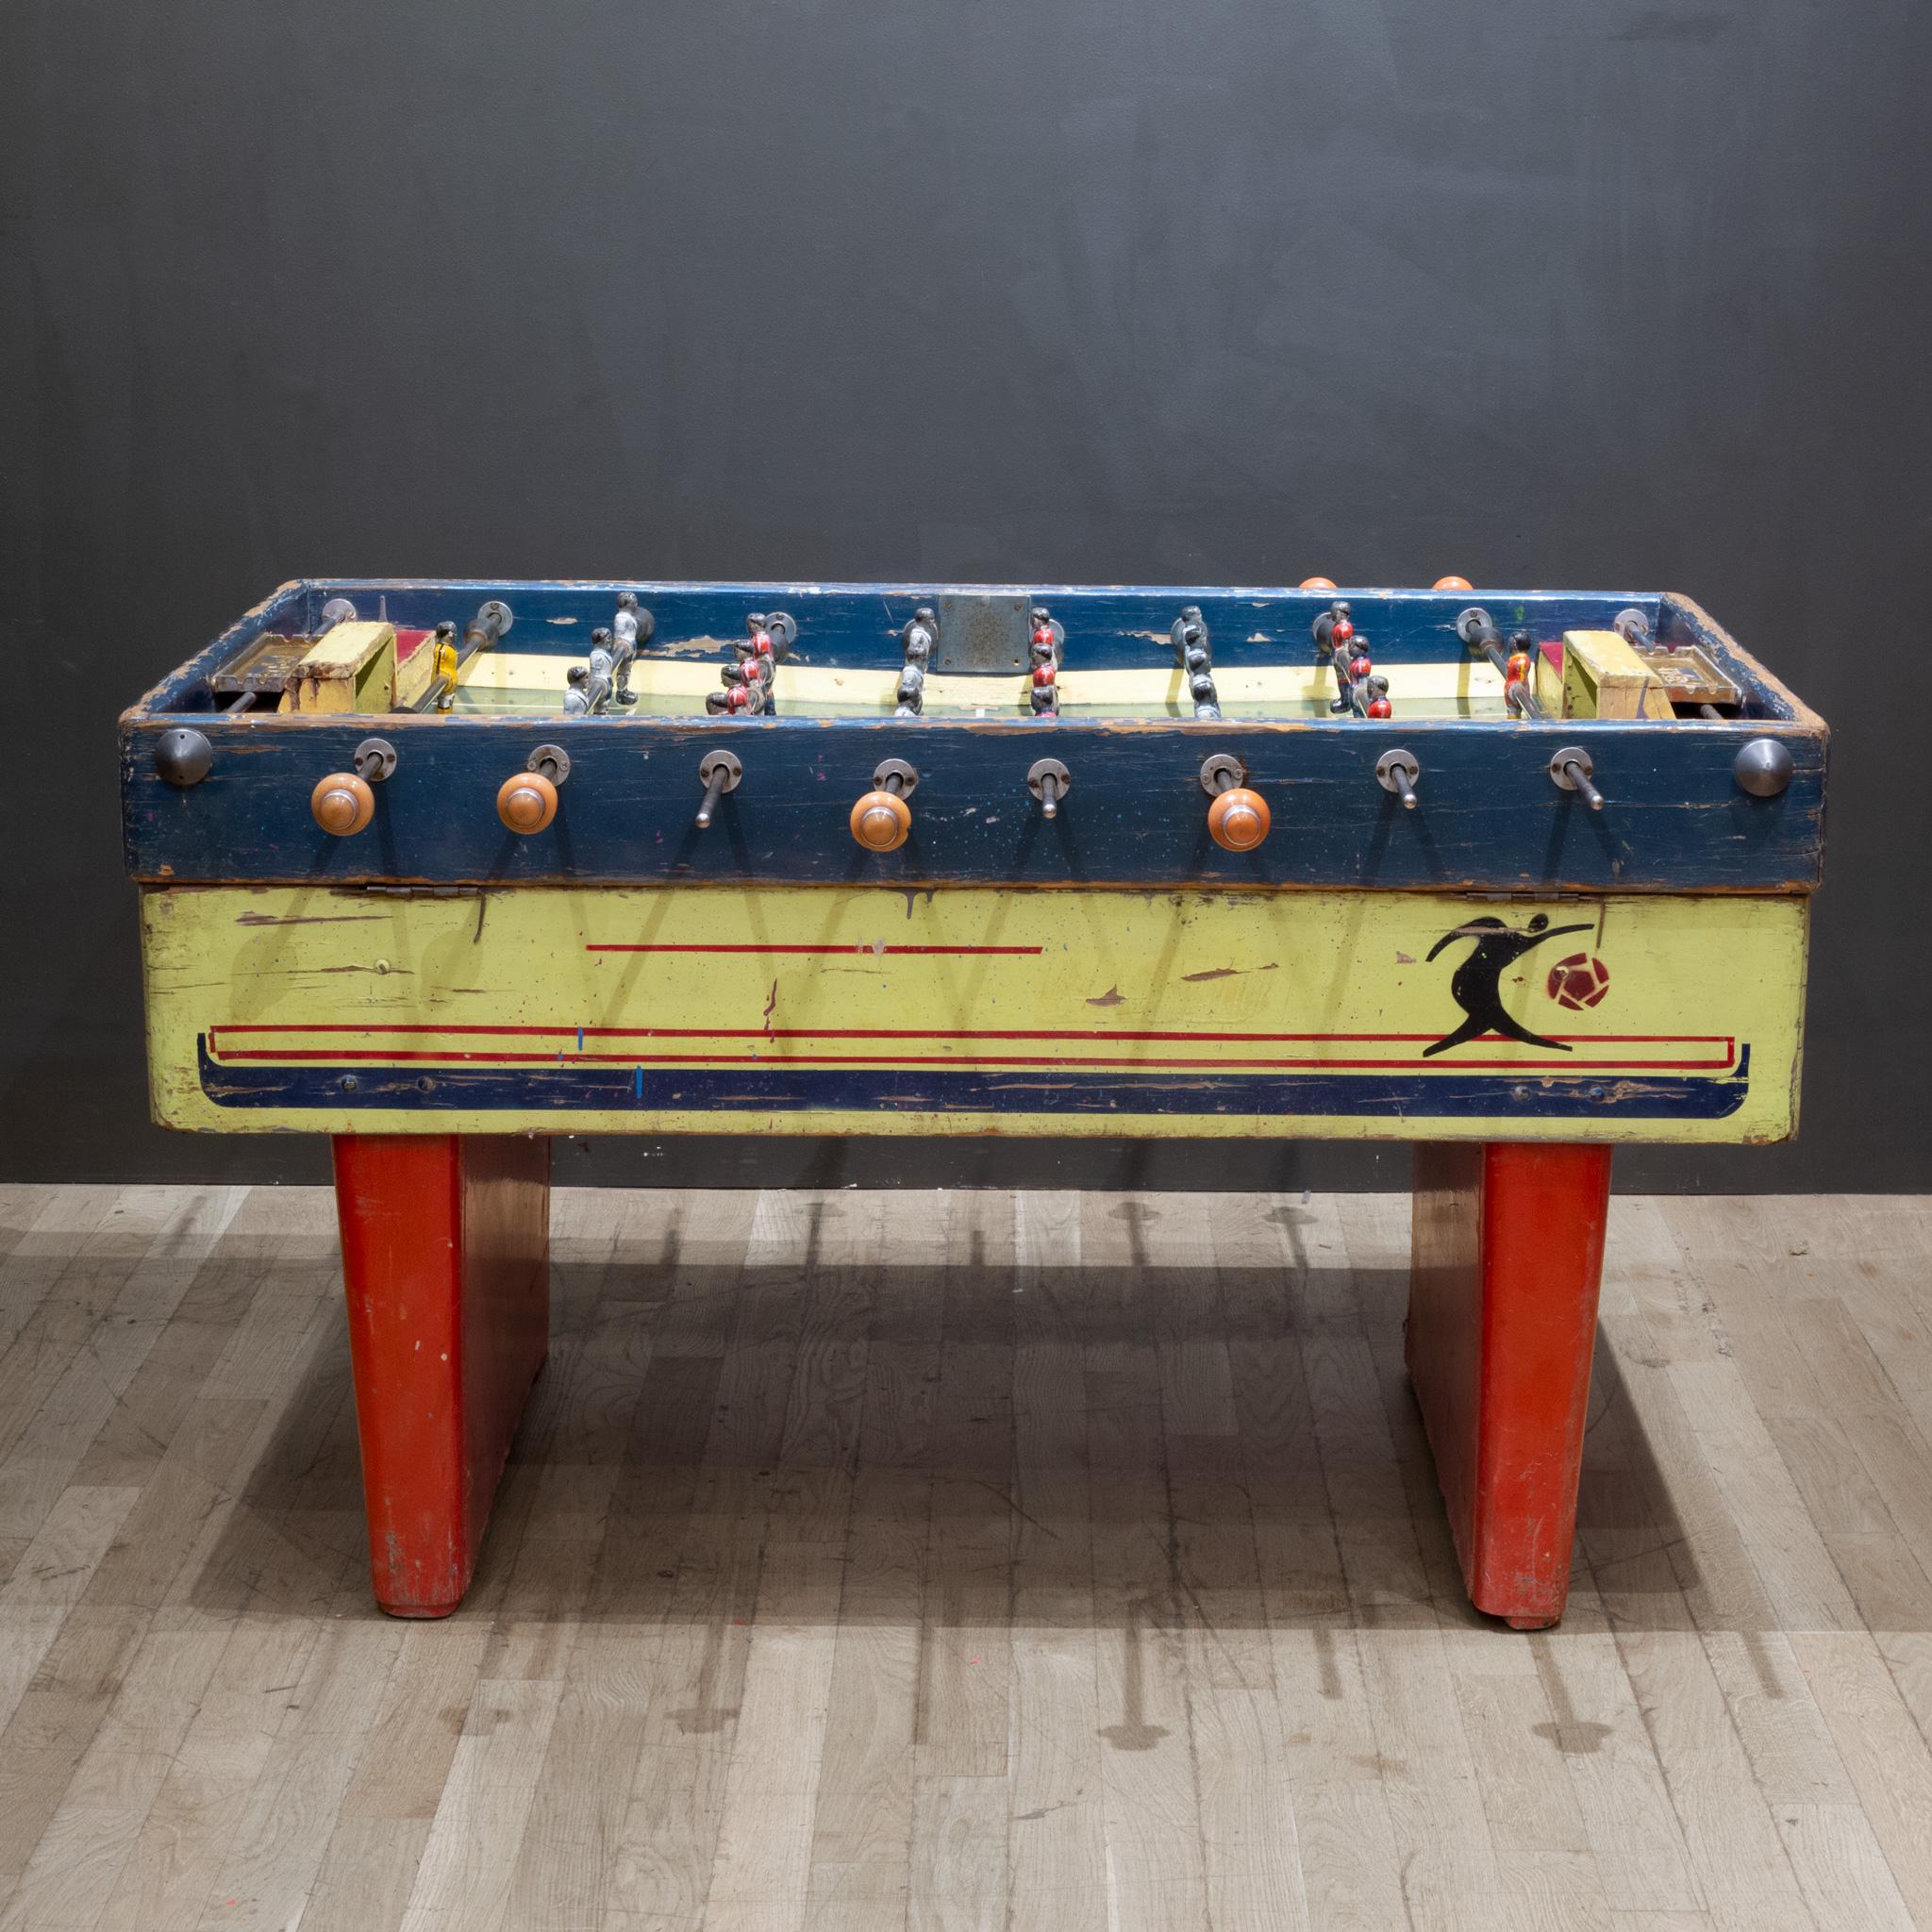 Vintage Mexican Foosball Table with Metal Players, circa 1940-1970 For Sale 5